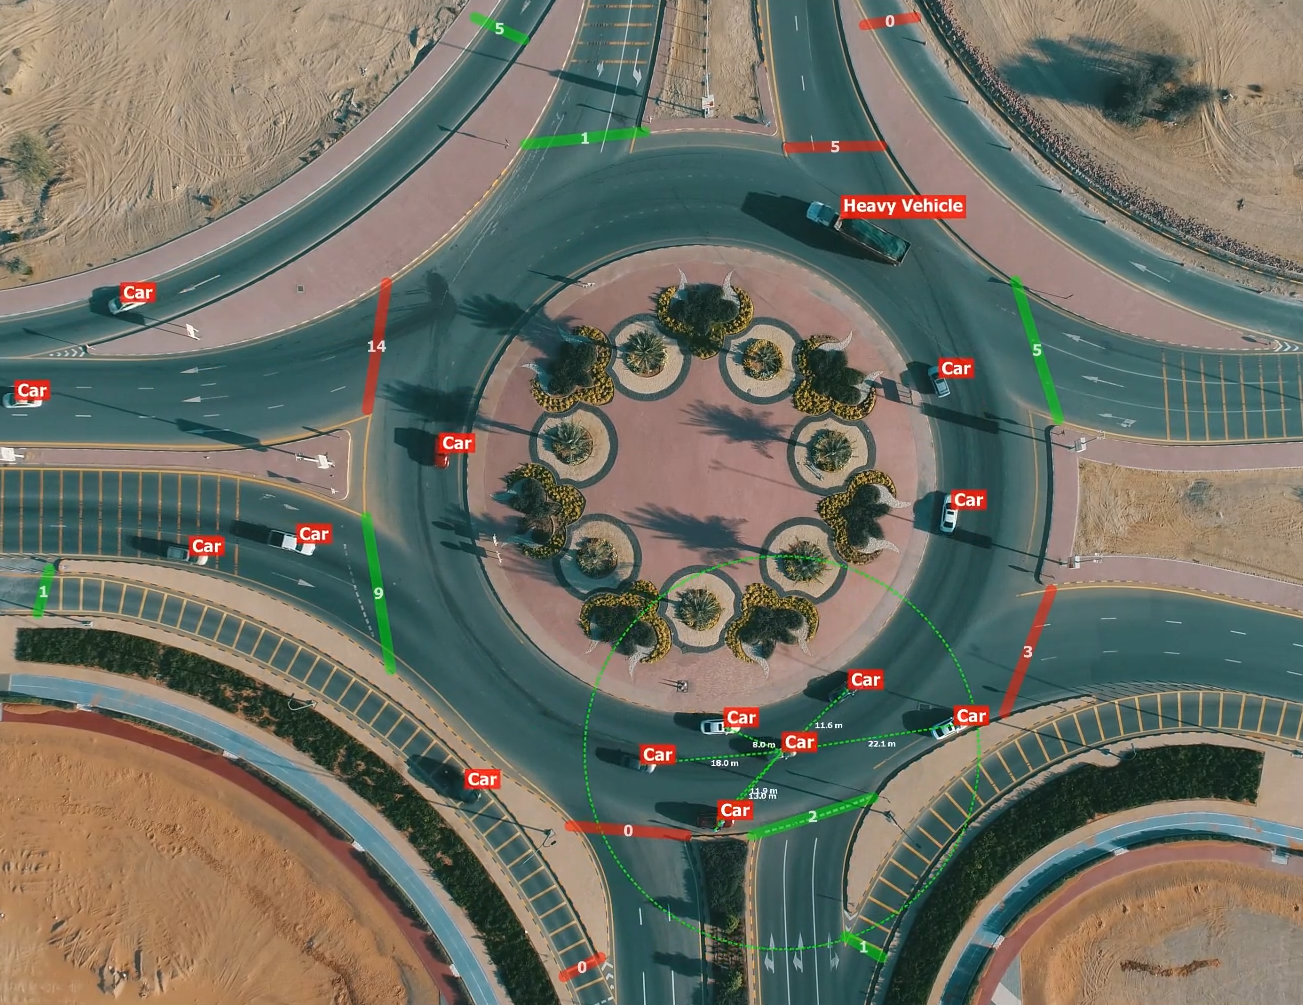 Aerial view of a roundabout showing vehicle categorization and distances